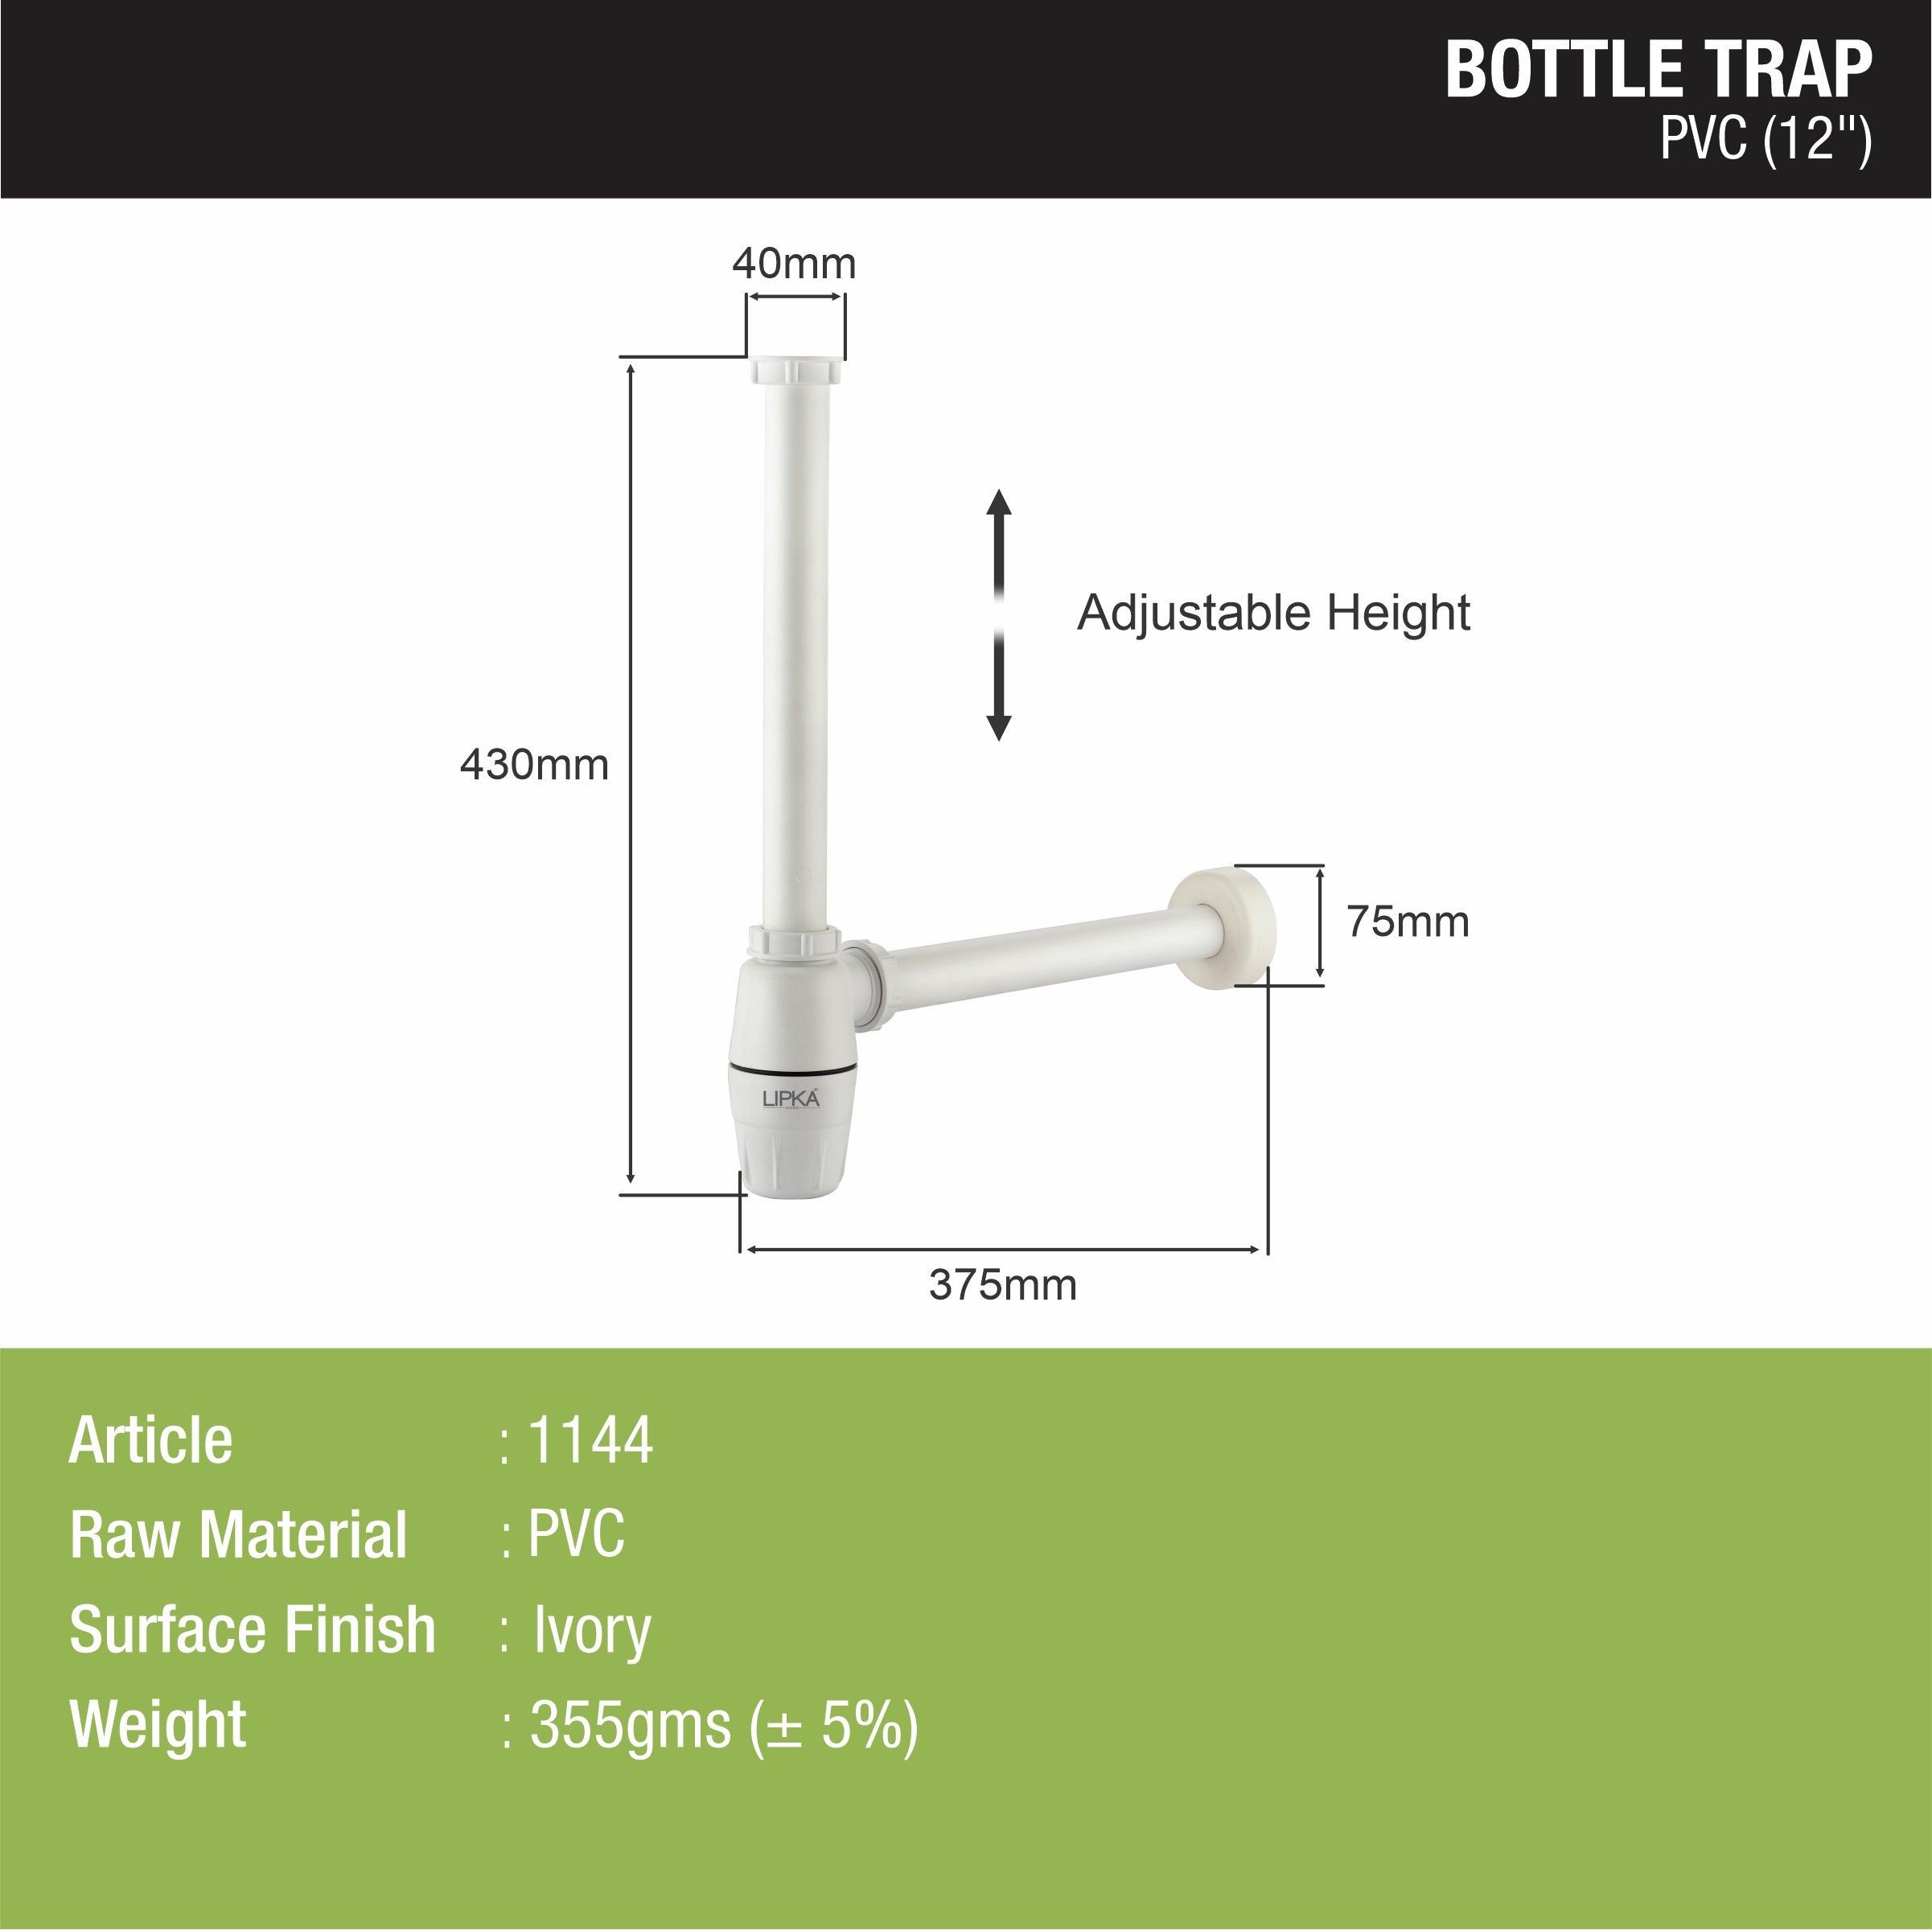 PVC Bottle Trap (12 Inches) sizes and dimensions